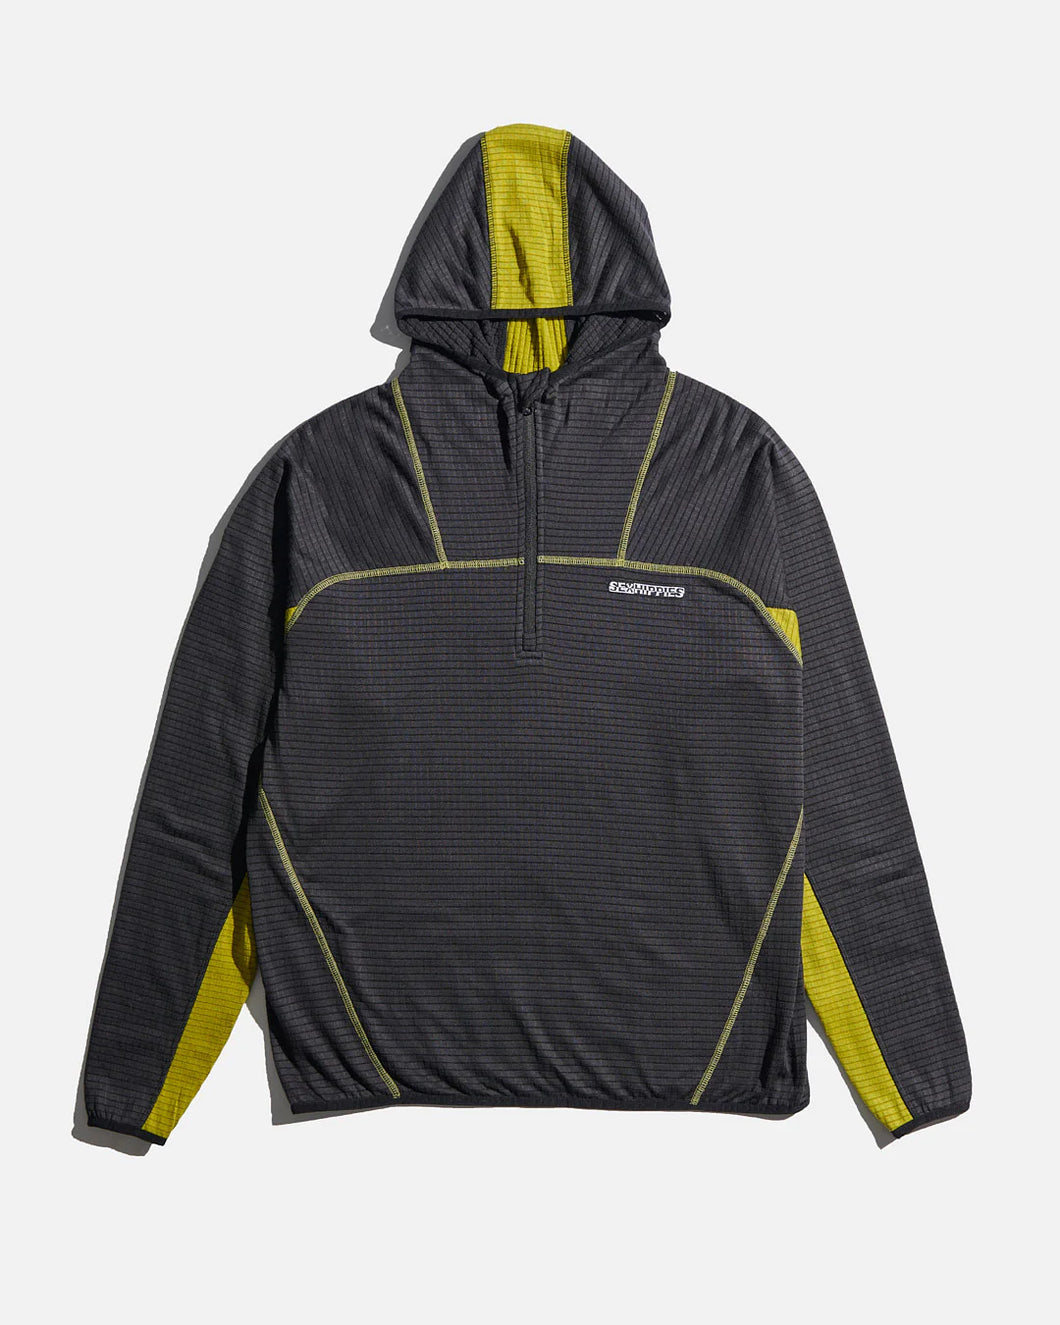 Sexhippies Grid Fleece Hooded Pullover 